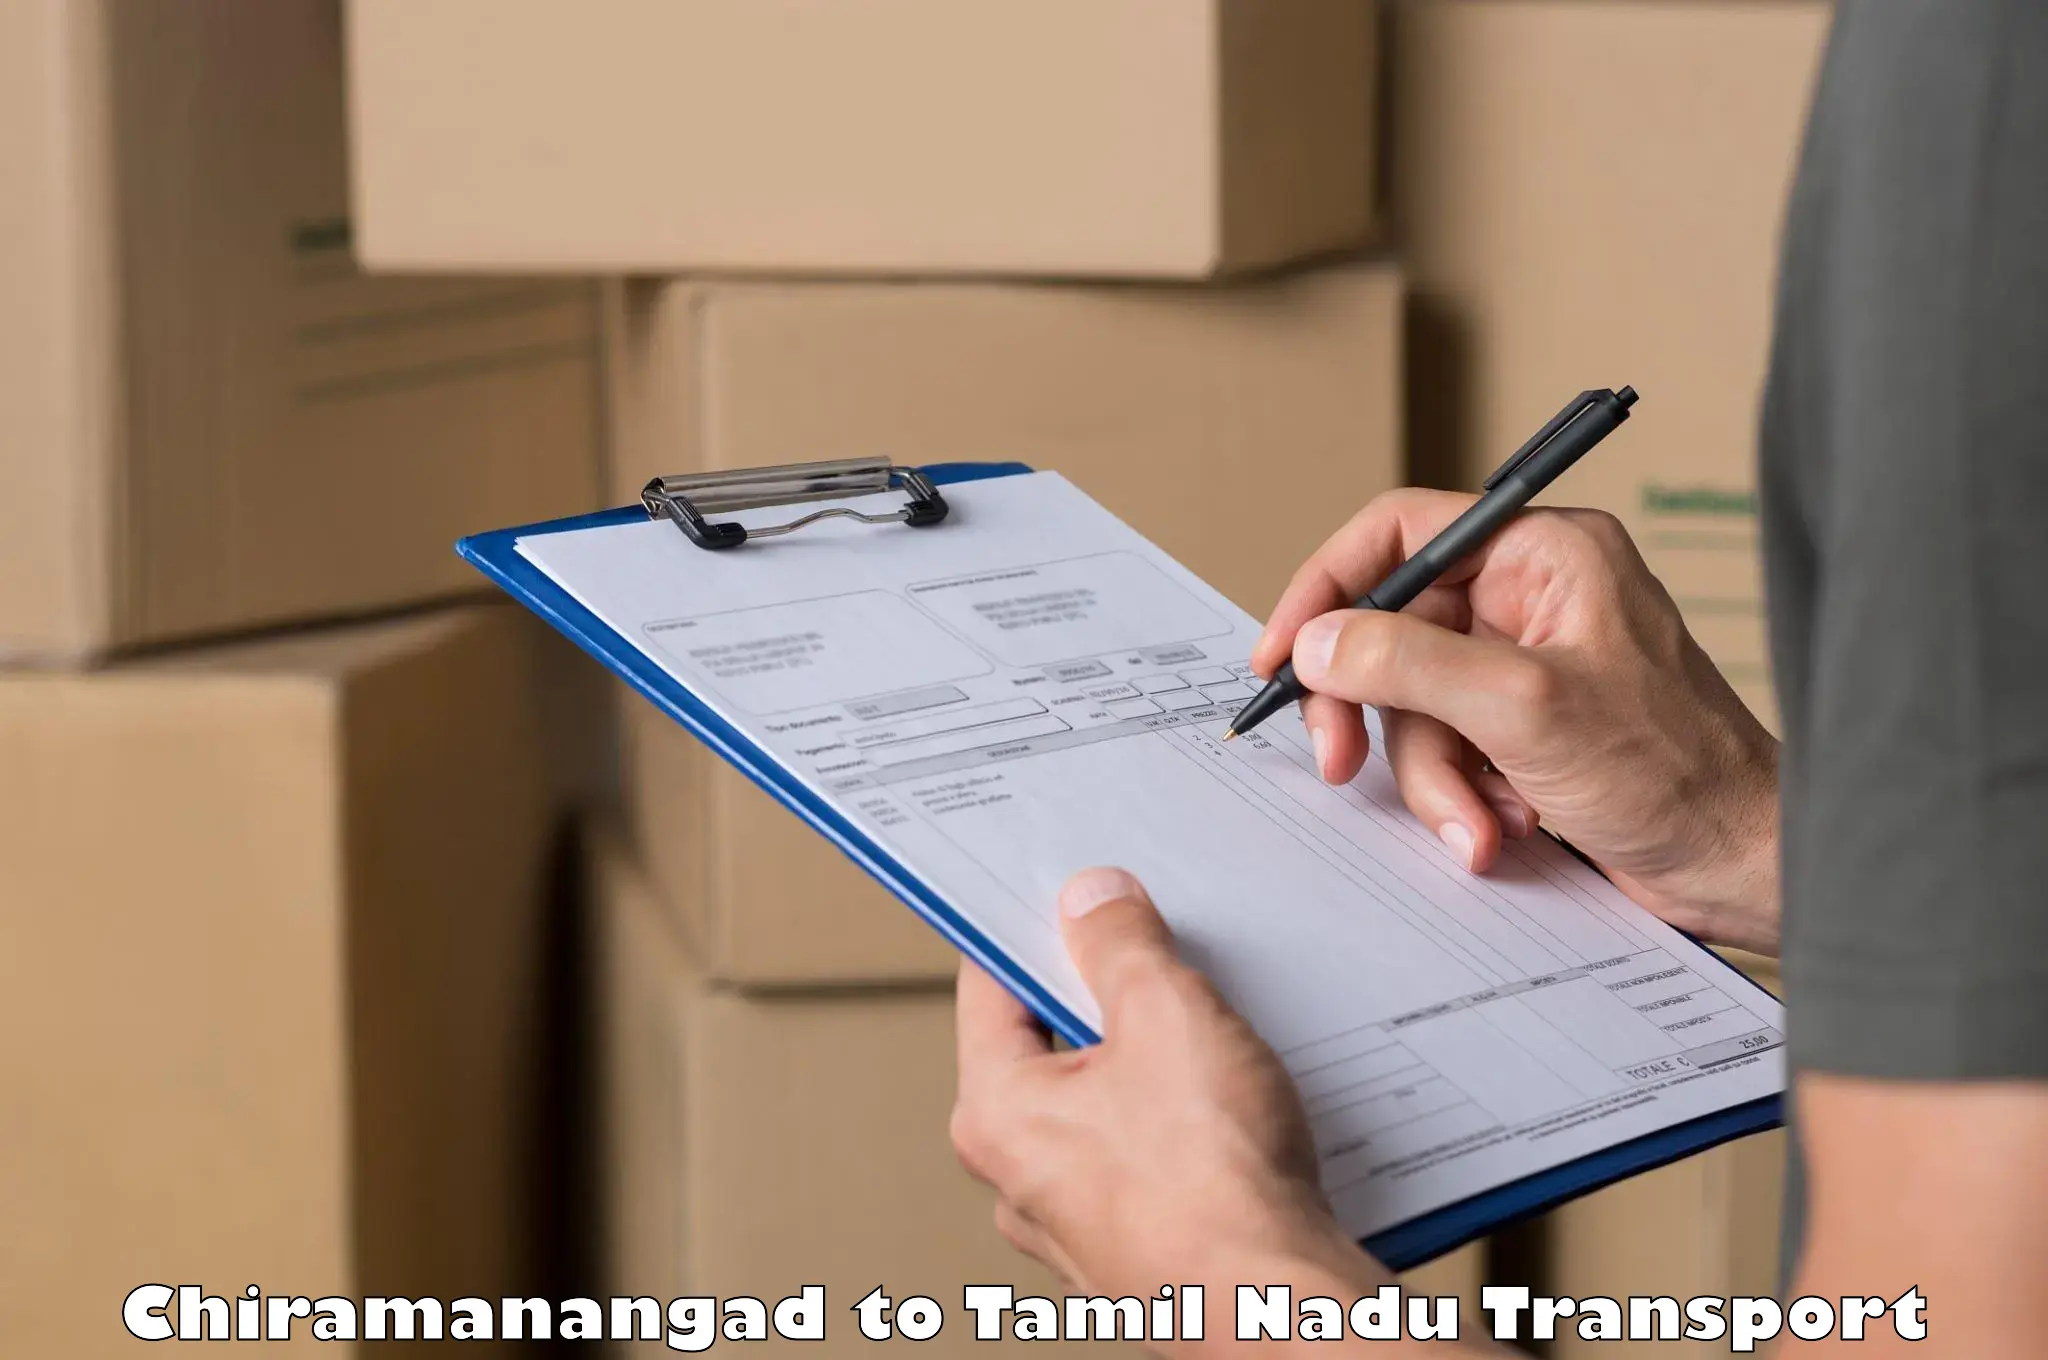 Transport shared services in Chiramanangad to Dindigul